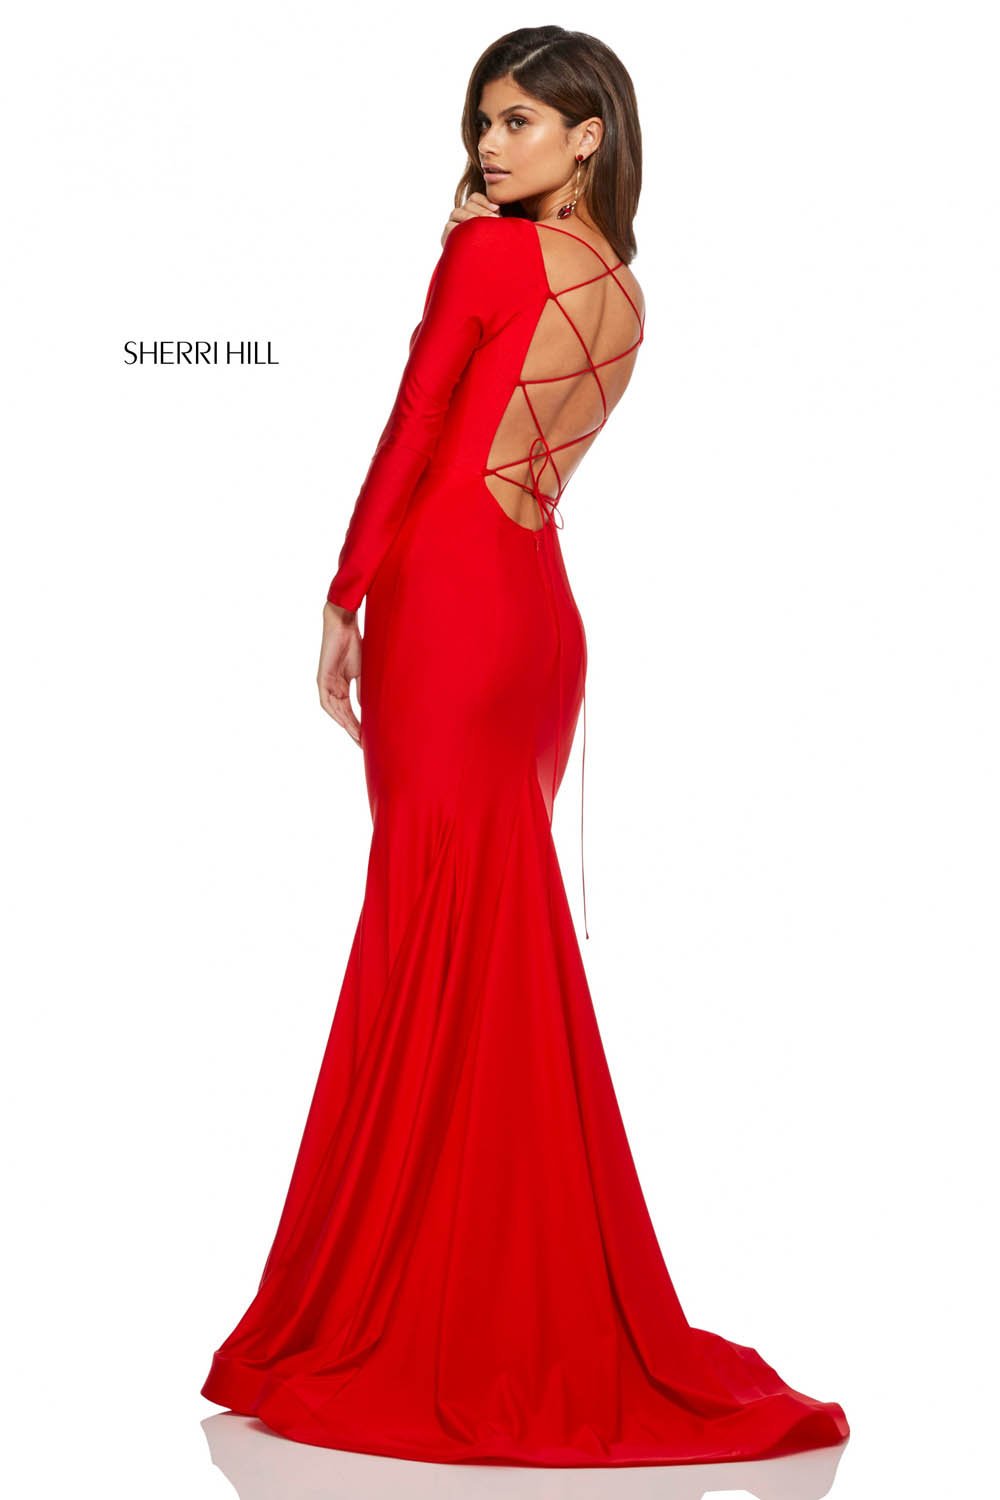 Sherri Hill 52785 dress images in these colors: Black, Navy, Light Blue, Wine, Royal, Orchid, Berry, Blush, Red.